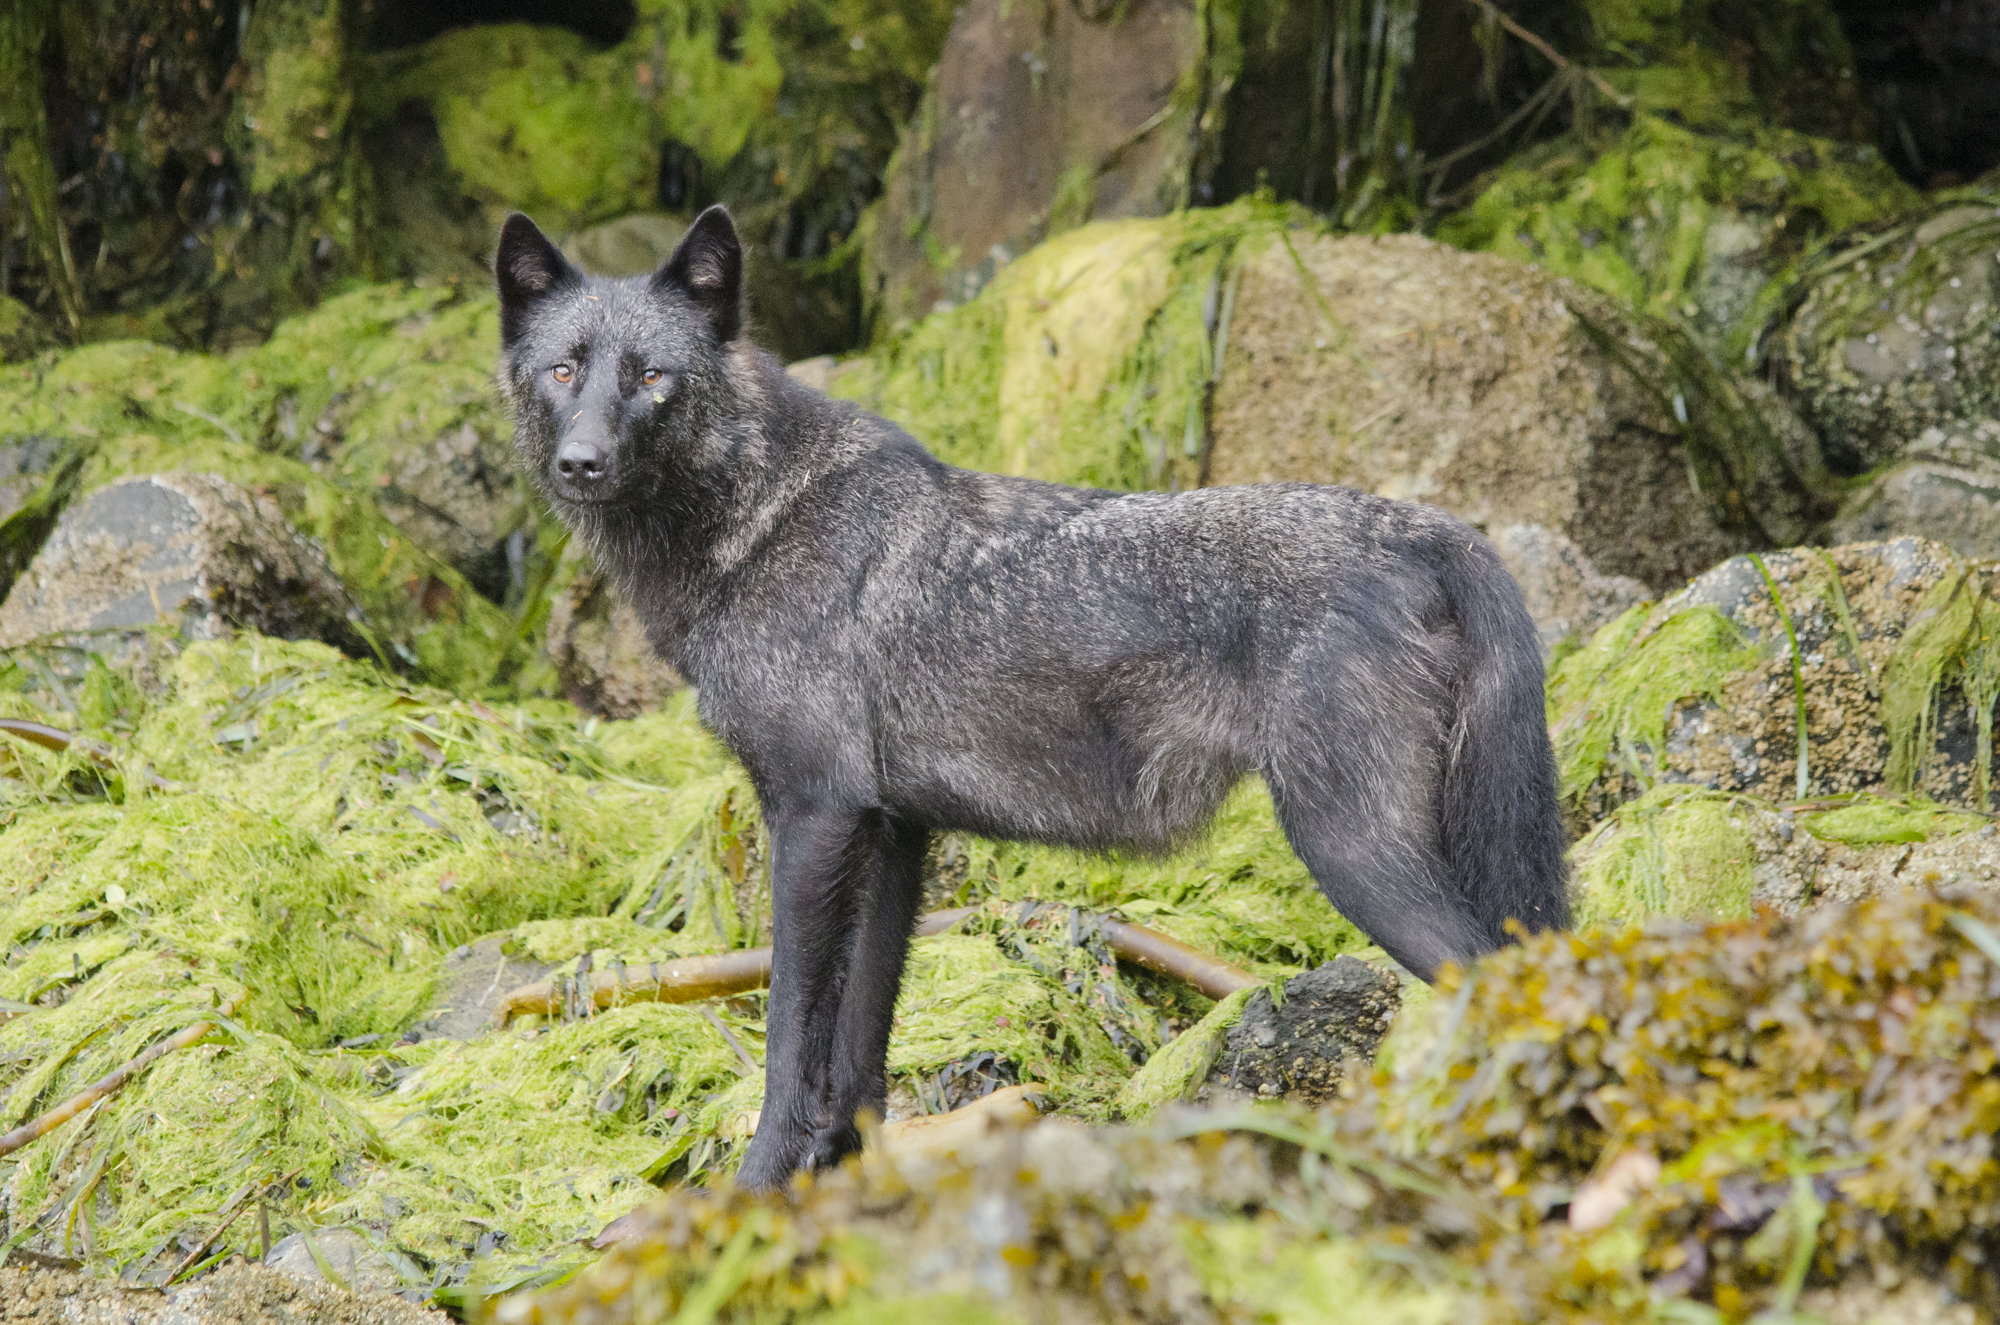  A coastal grey wolf searching for food amongst seaweed.&nbsp; 